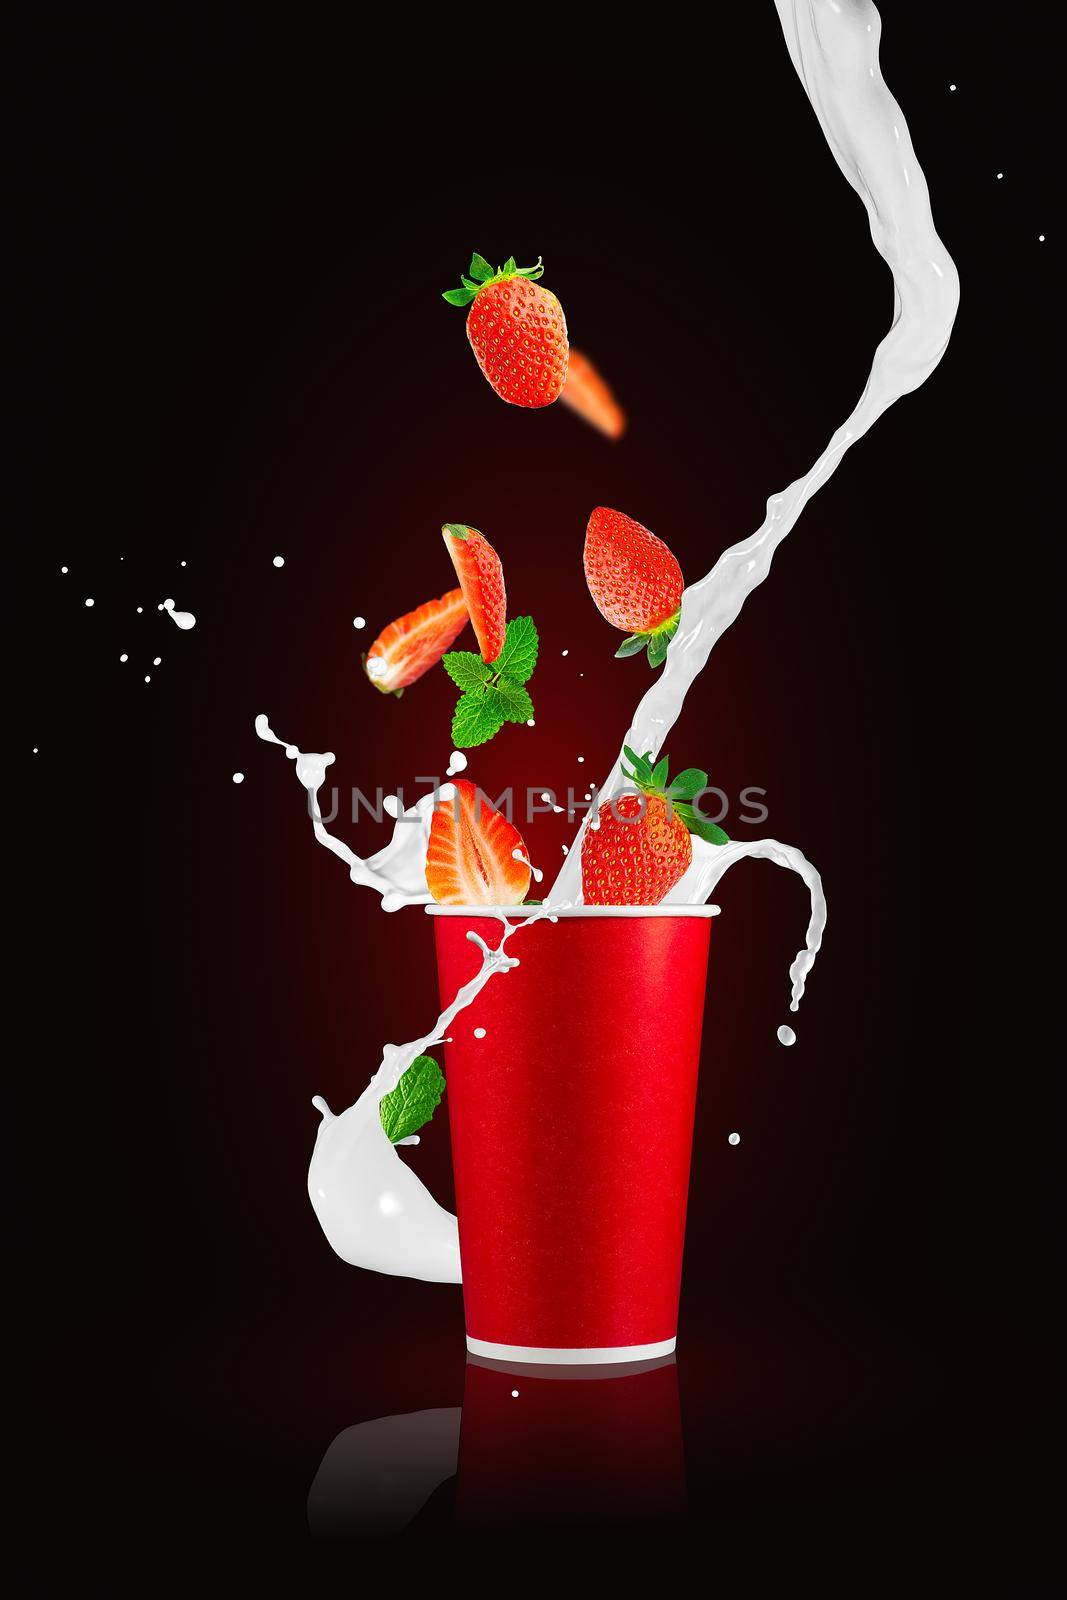 Strawberry berries falling in paper takeaway cup with milk splashes. Strawberry smoothie splash. by PhotoTime